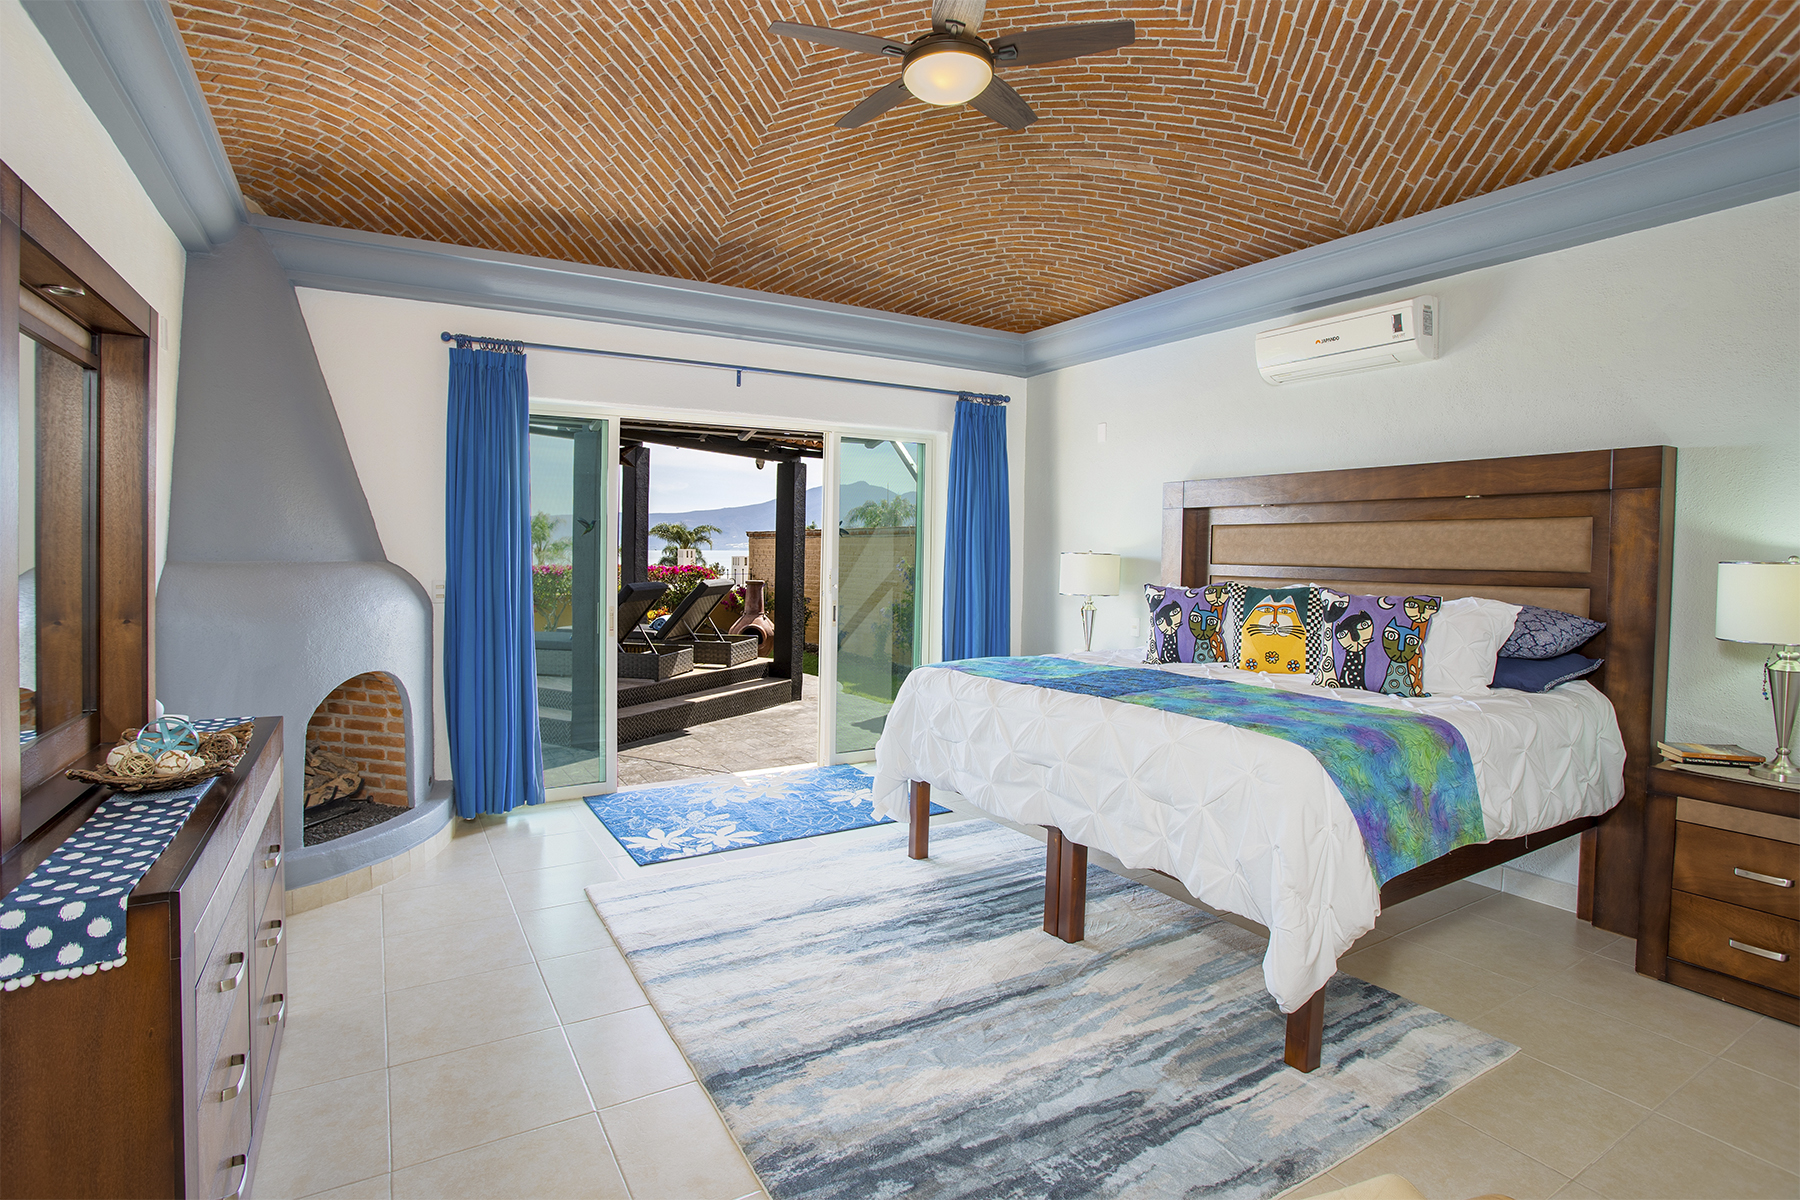 02 Master Bedroom with Lake View, Fireplace and Brick Domed Ceiling